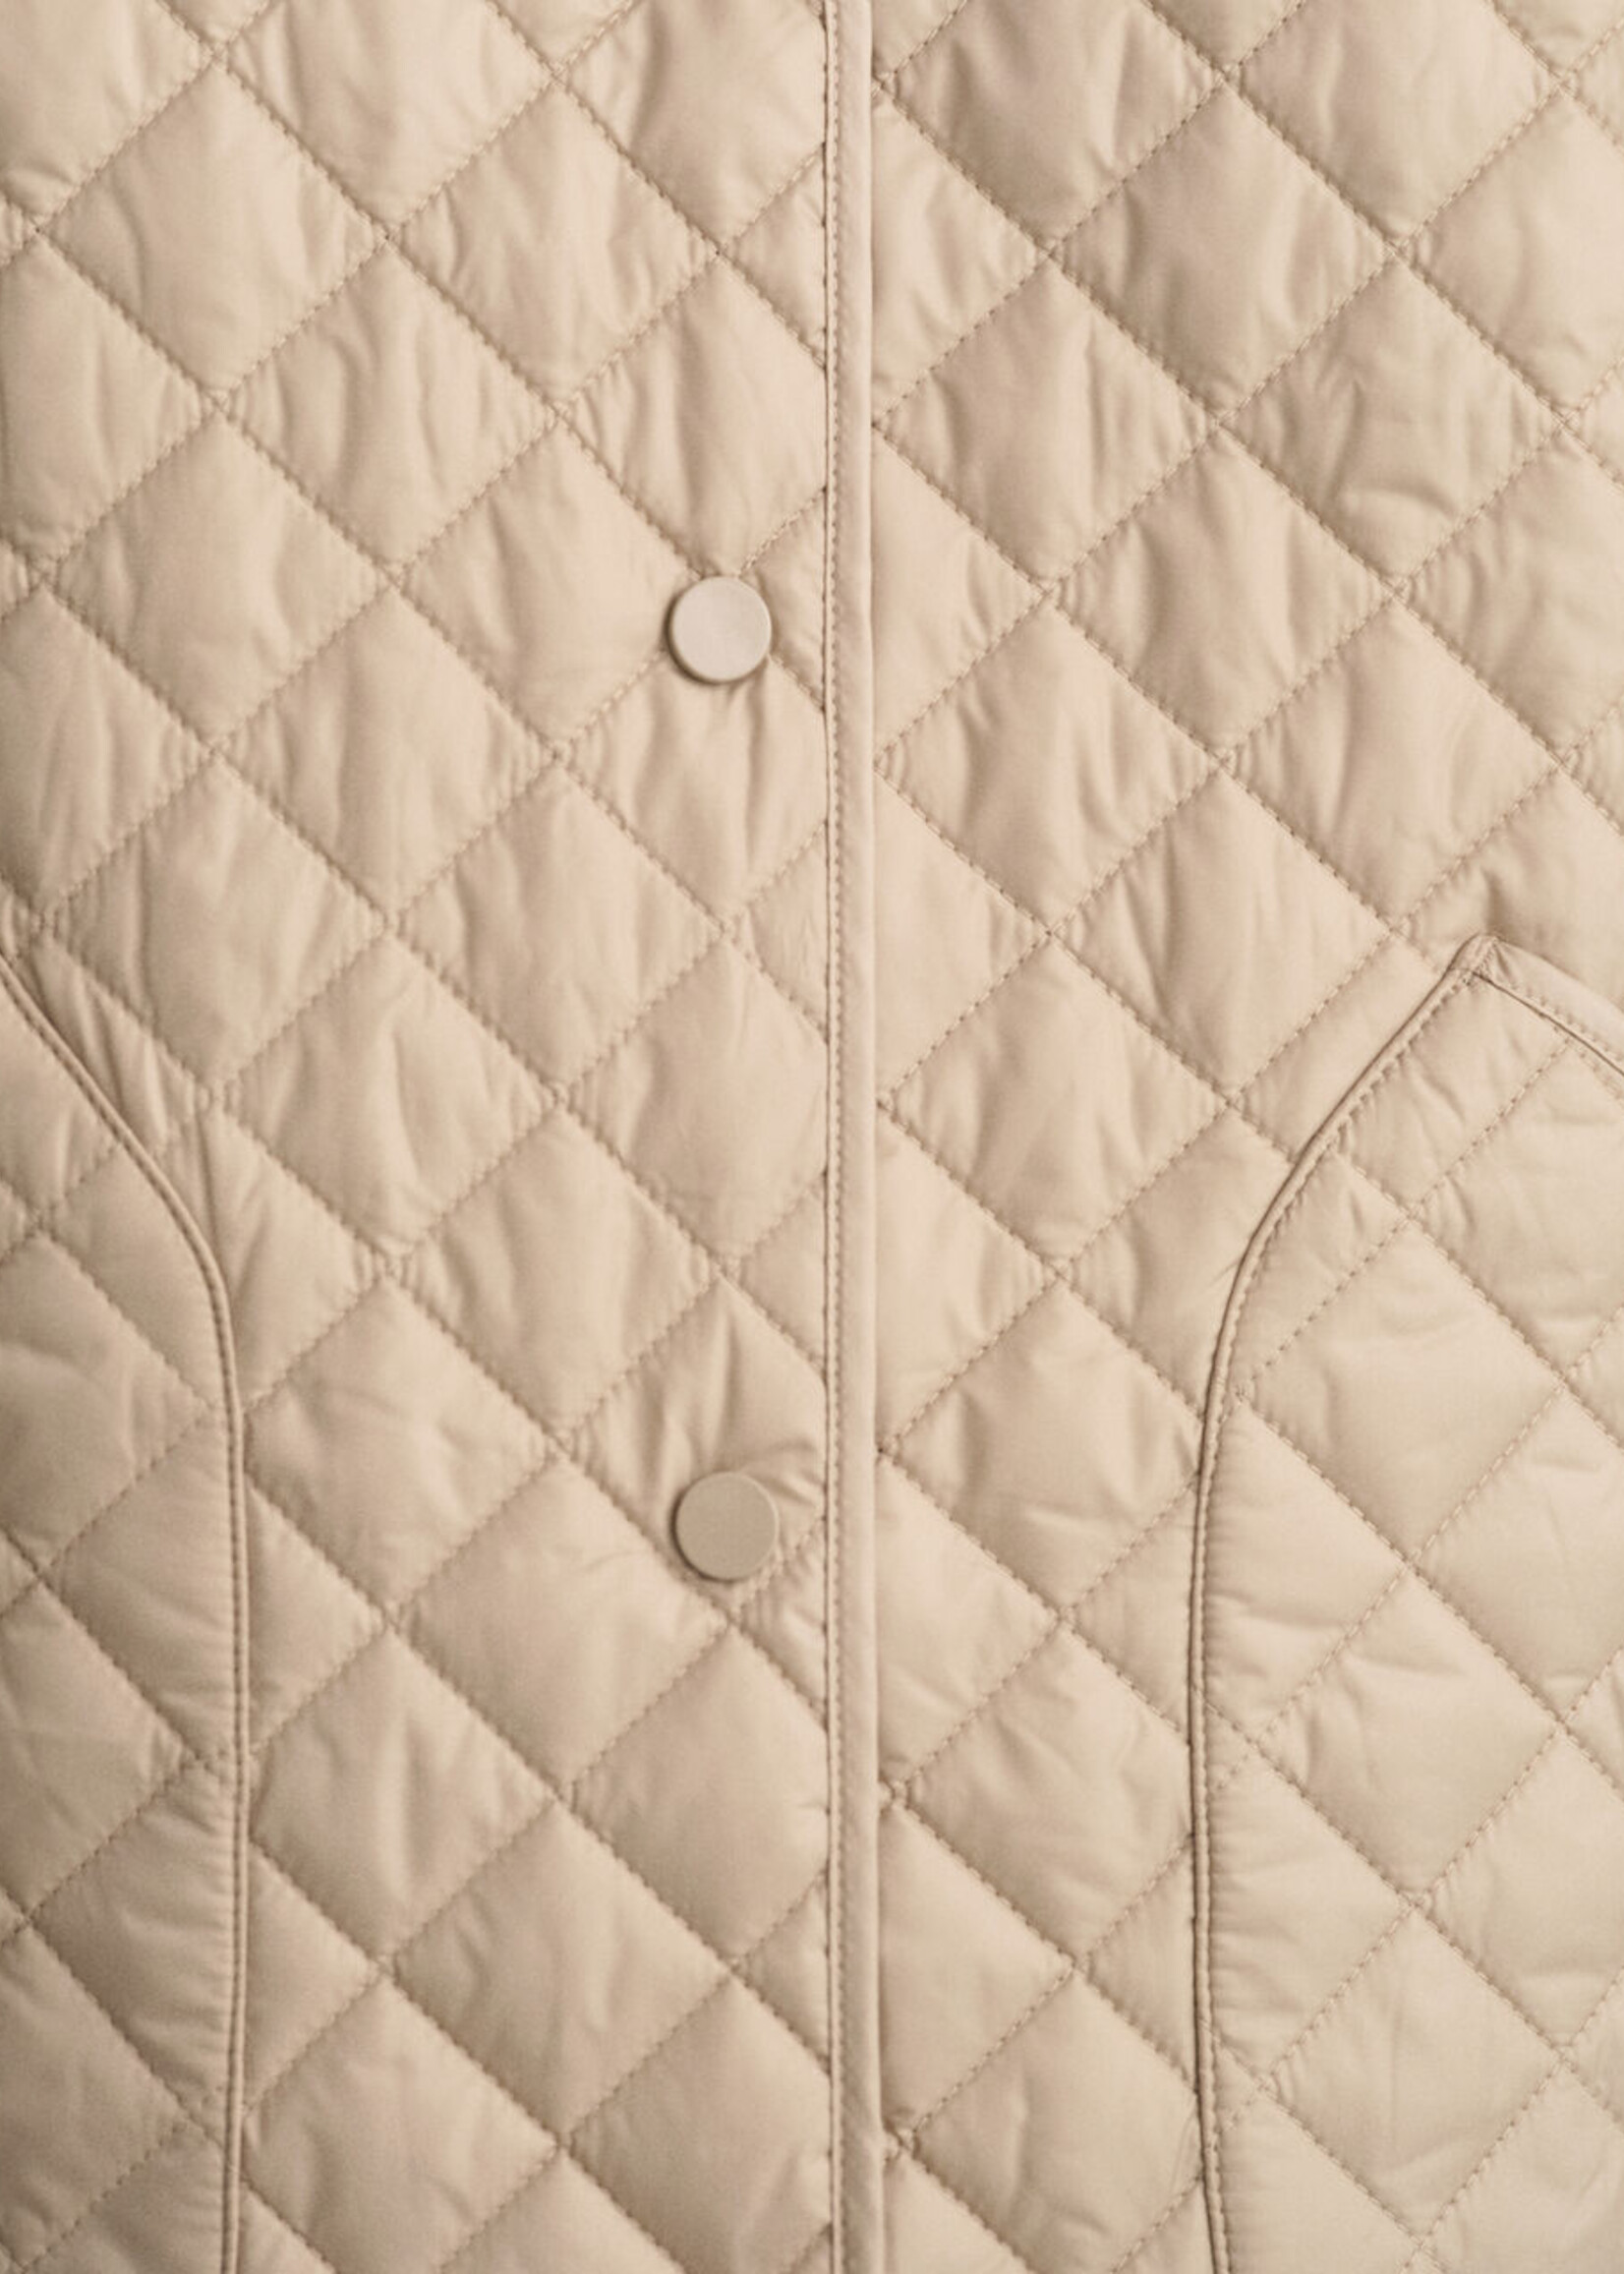 QUILTED LINER JACKET